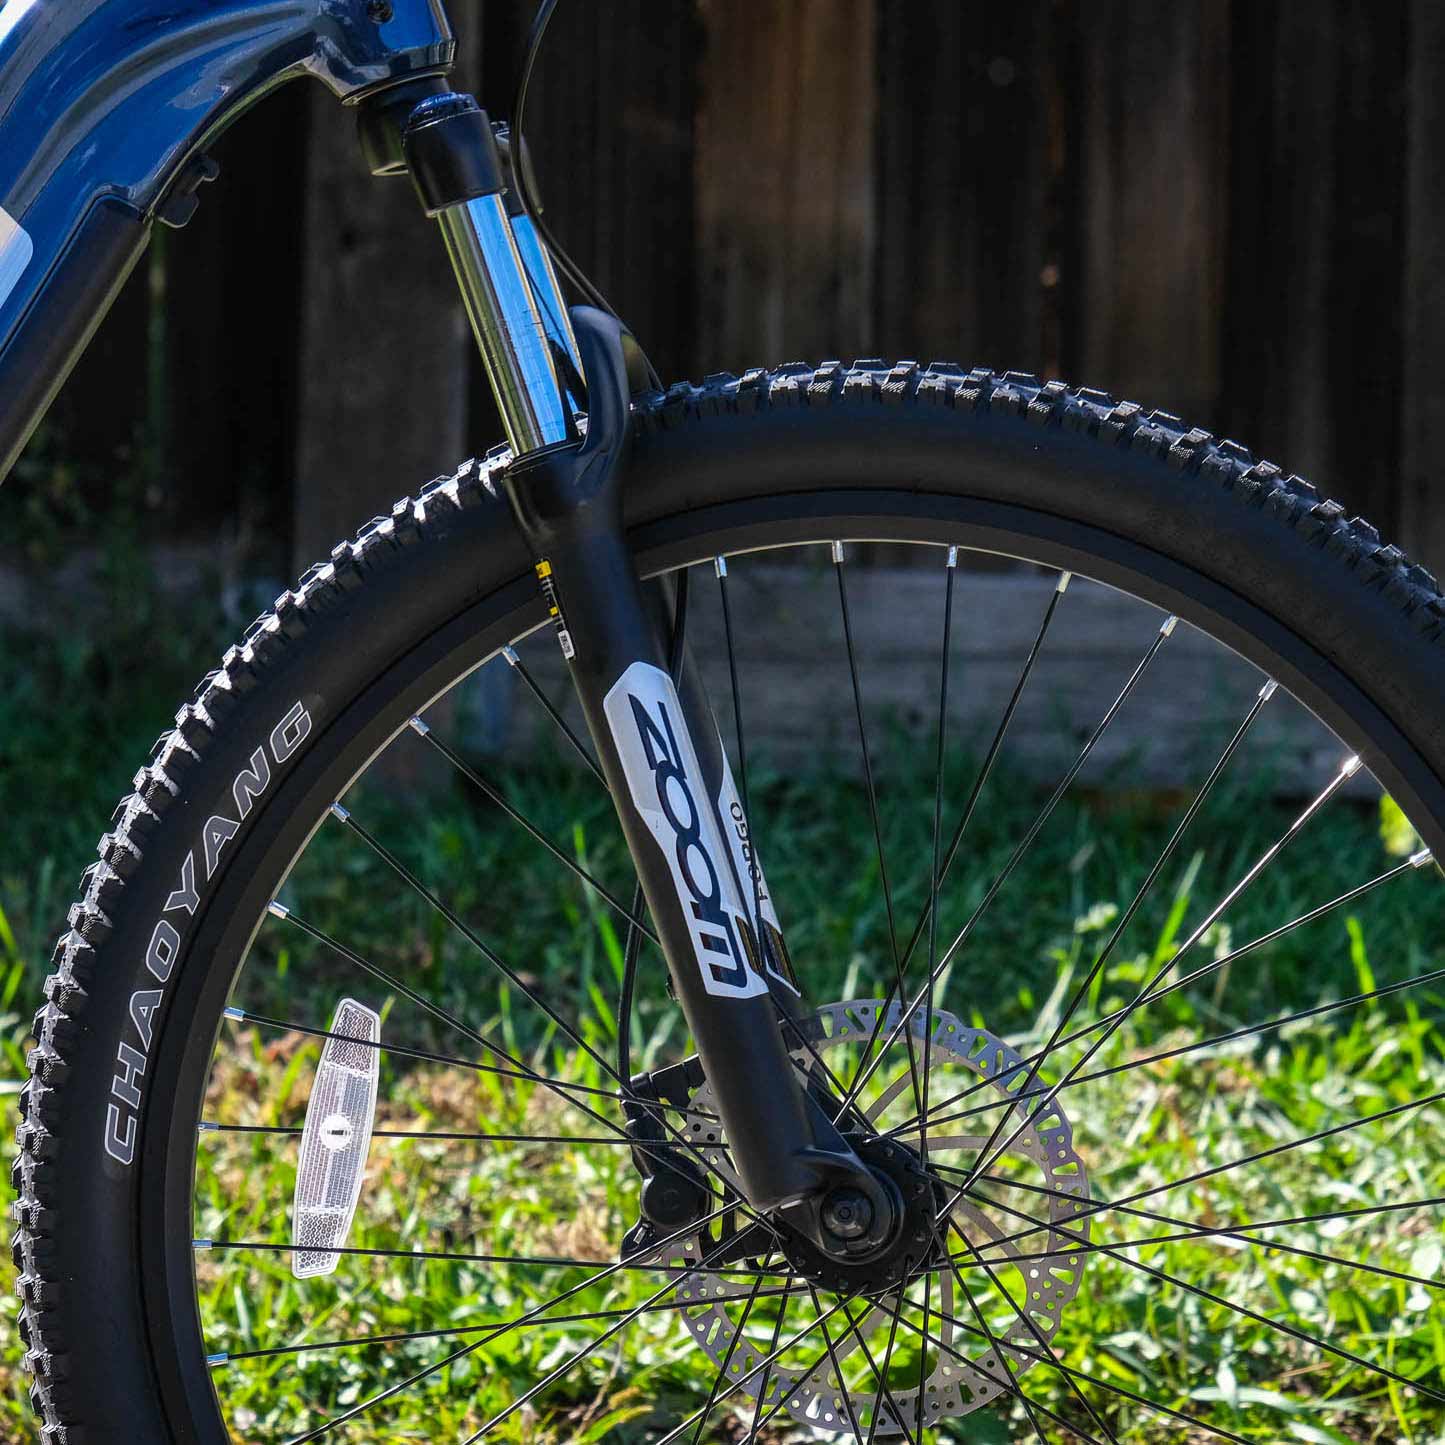 The bike’s Zoom suspension fork has 75 millimeters of travel.